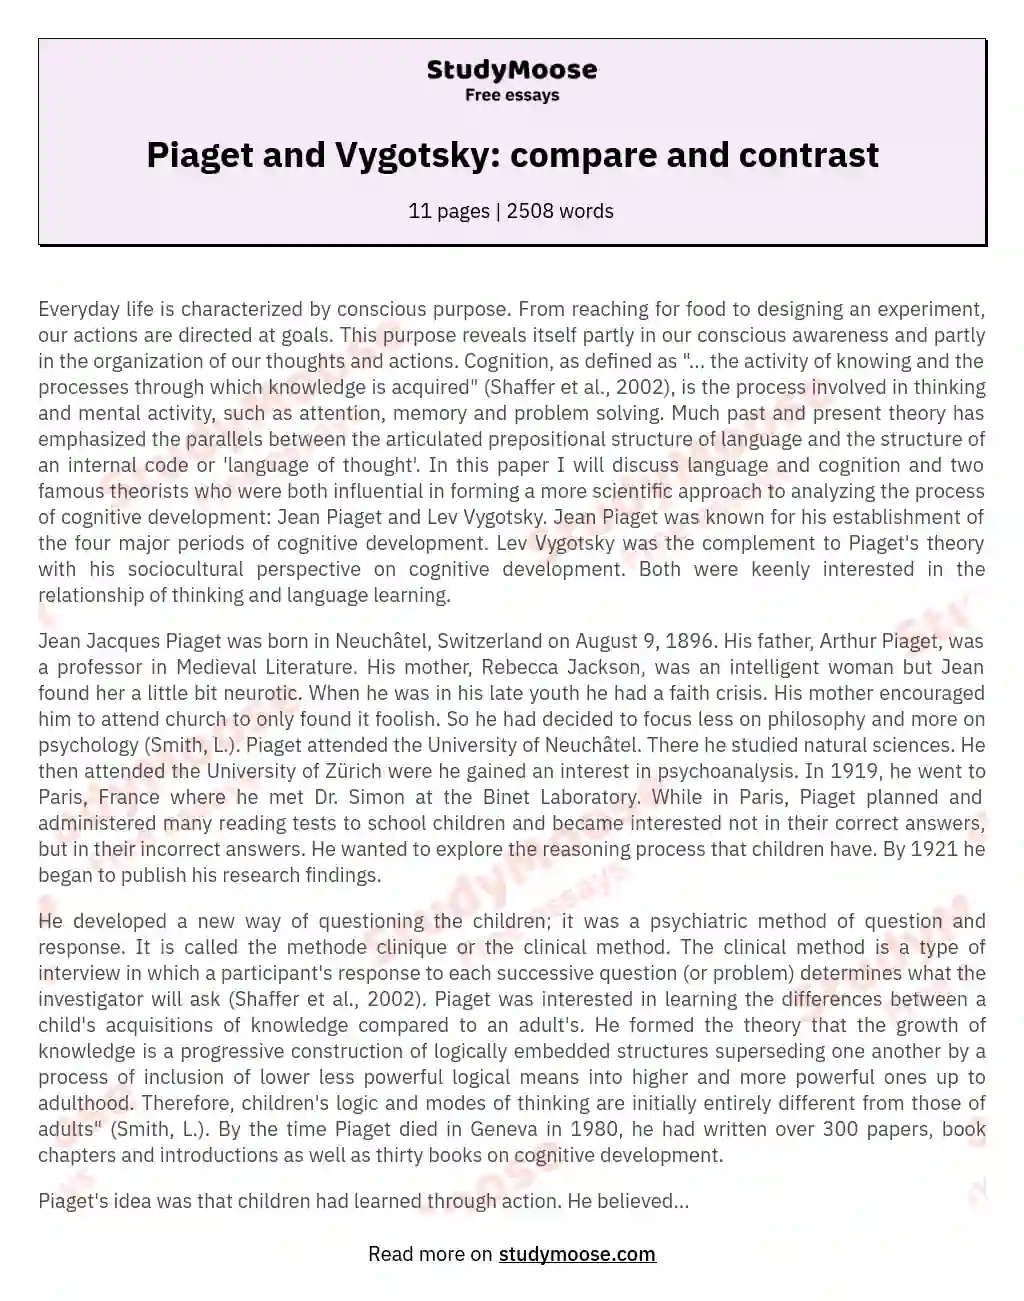 Piaget and Vygotsky: compare and contrast essay